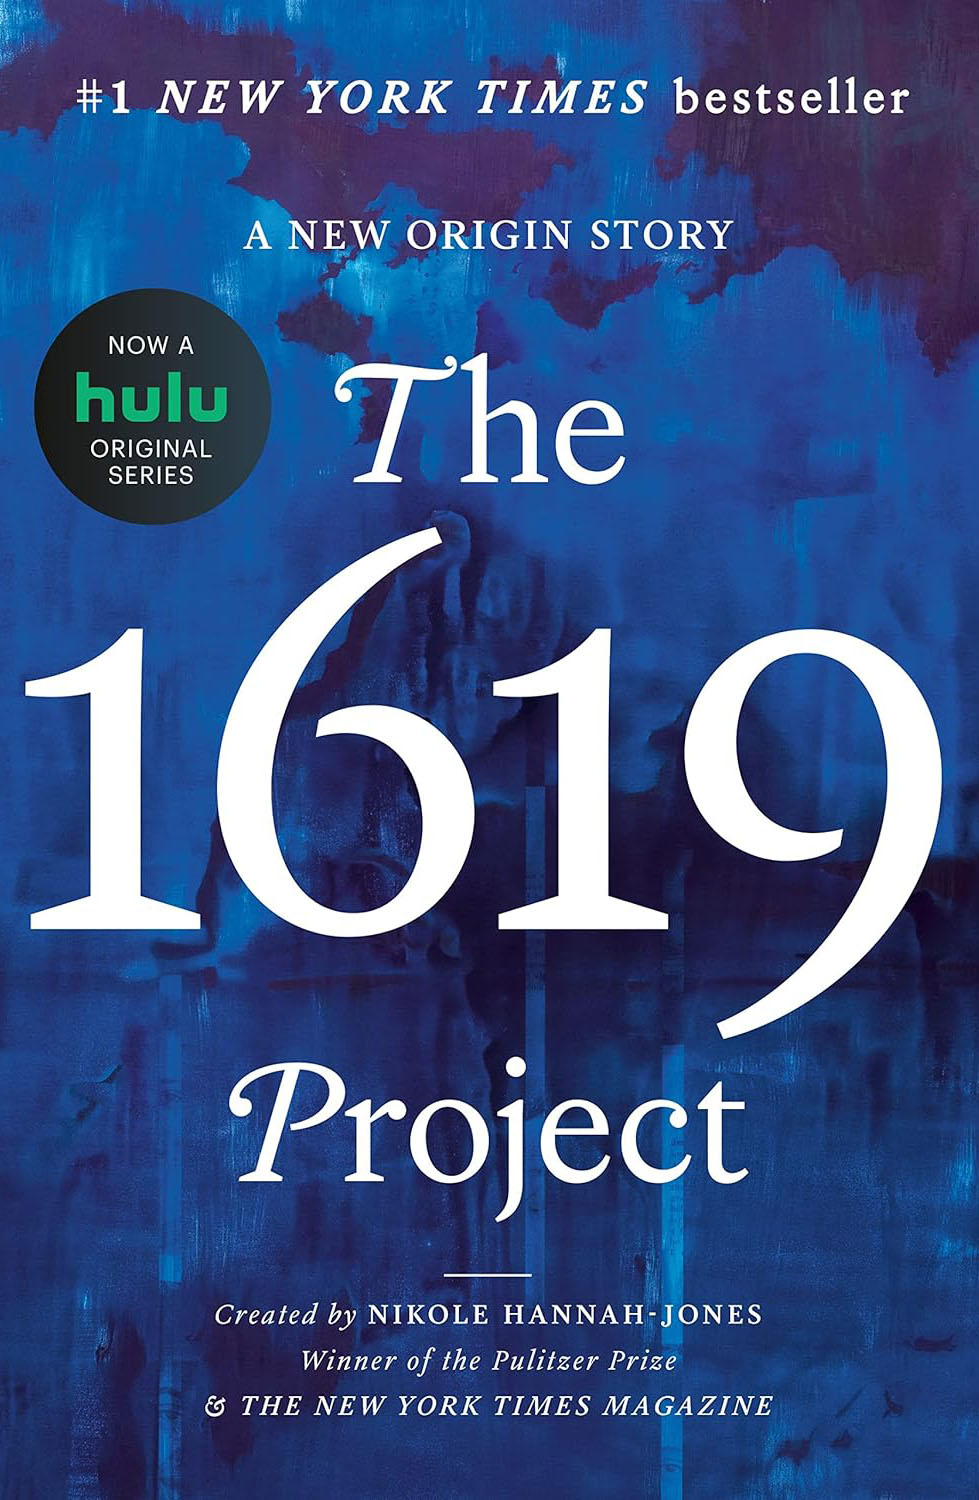 "The 1619 Project"